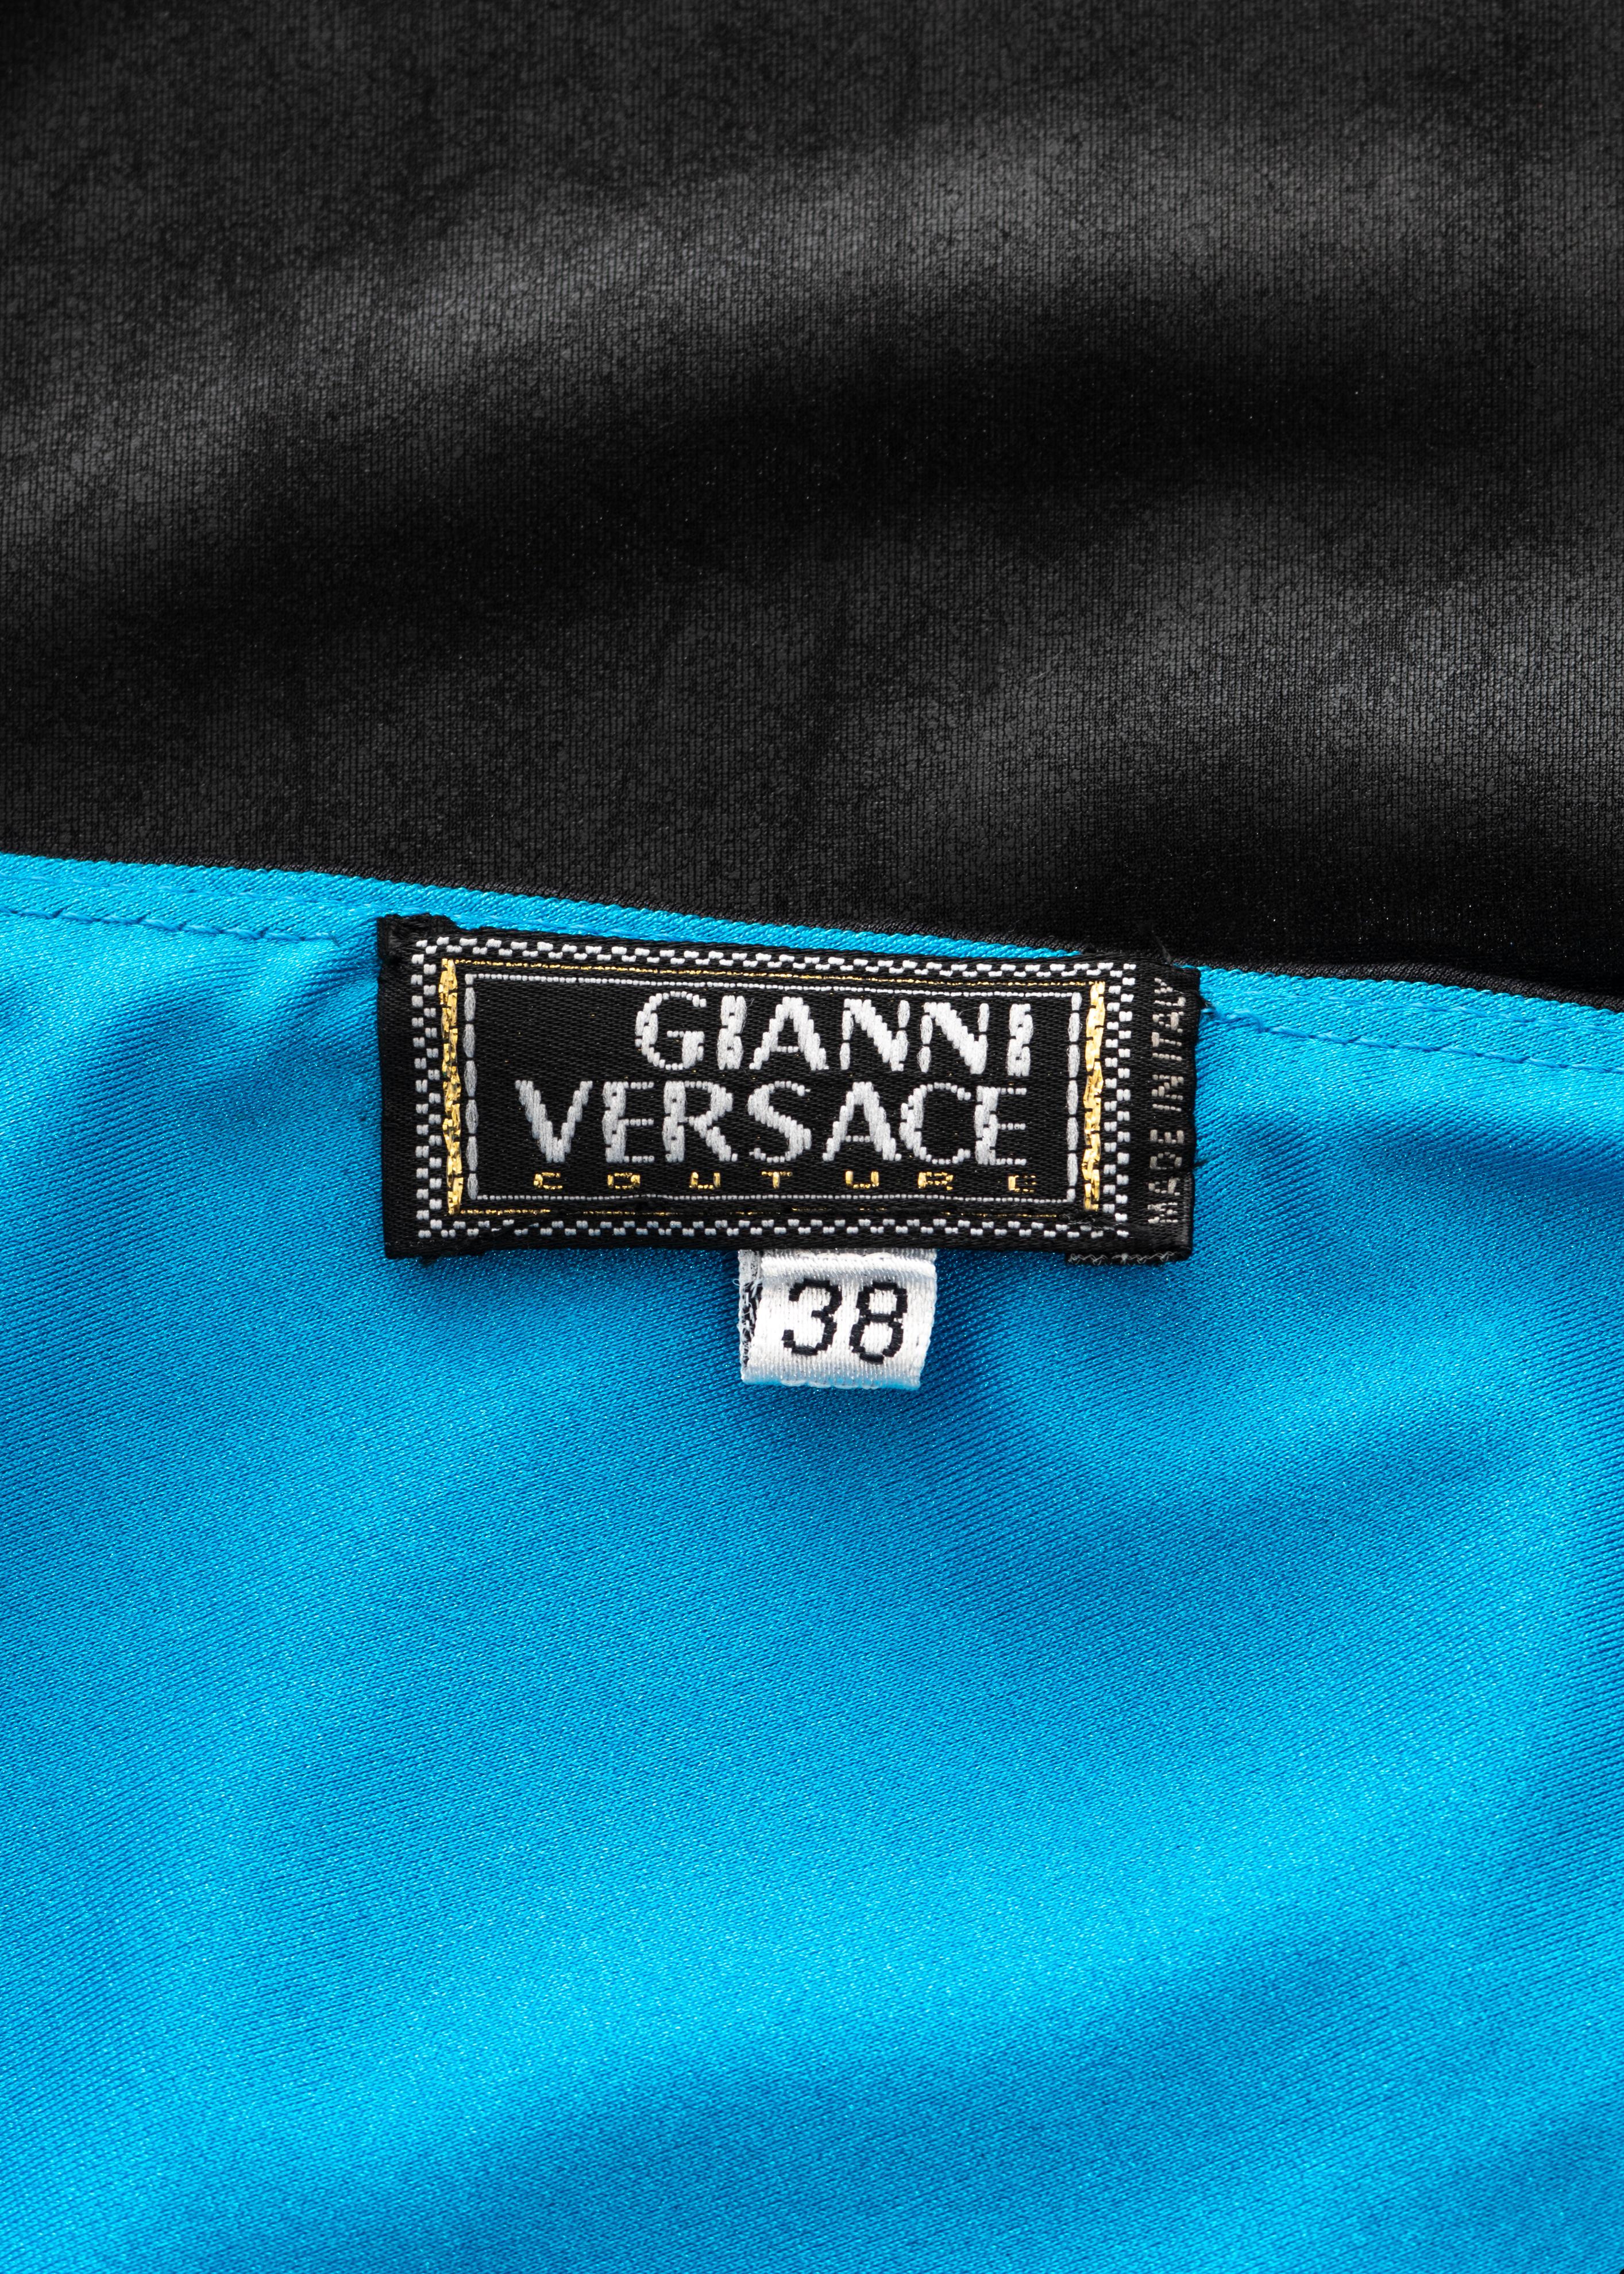 Gianni Versace black and electric blue strapless maxi dress, ss 1998 3